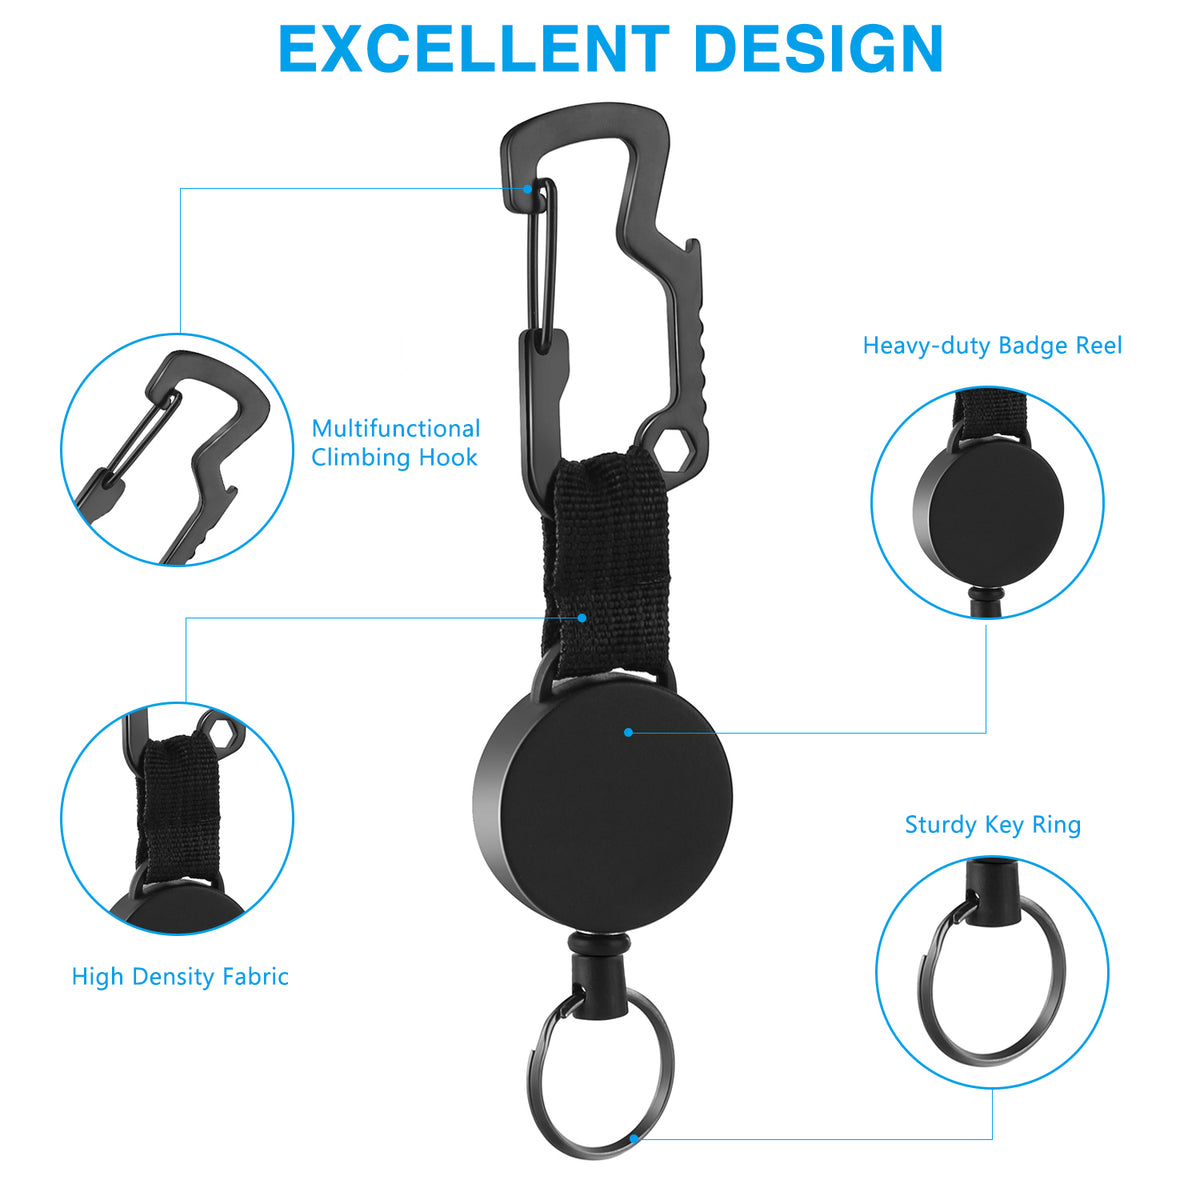 DELSWIN Retractable Keychain Carabiner Key Holders - Heavy Duty Retractable Key Chain Badge Reel Clip with Steel Cable, Key Ring, Lobster Clasps for